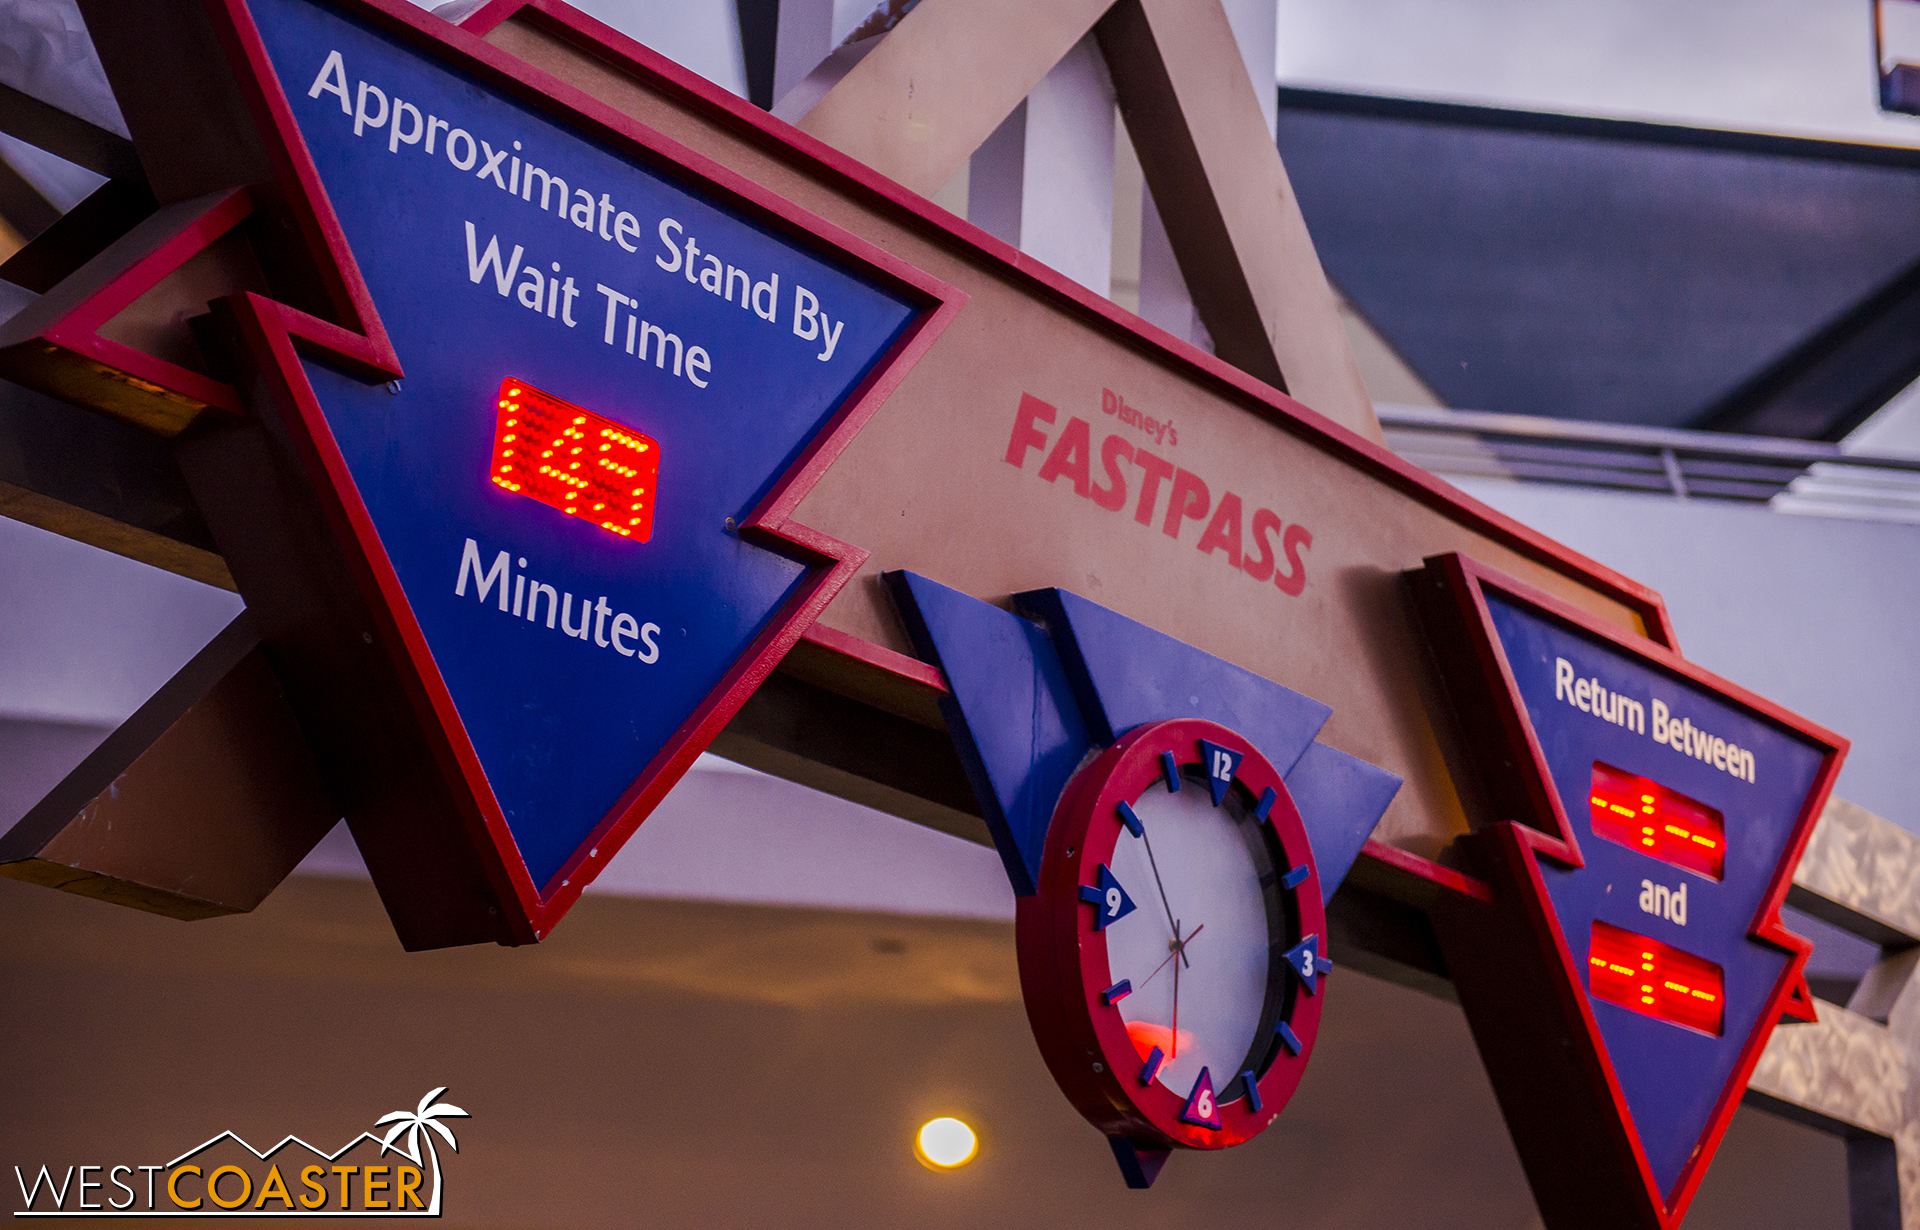  Disneyland starts getting Tokyo-level wait times.&nbsp; Nearly two and a half hours for Hyperspace Mountain?? No thanks.&nbsp; And wait times were near an hour for numerous other rides yesterday too. 